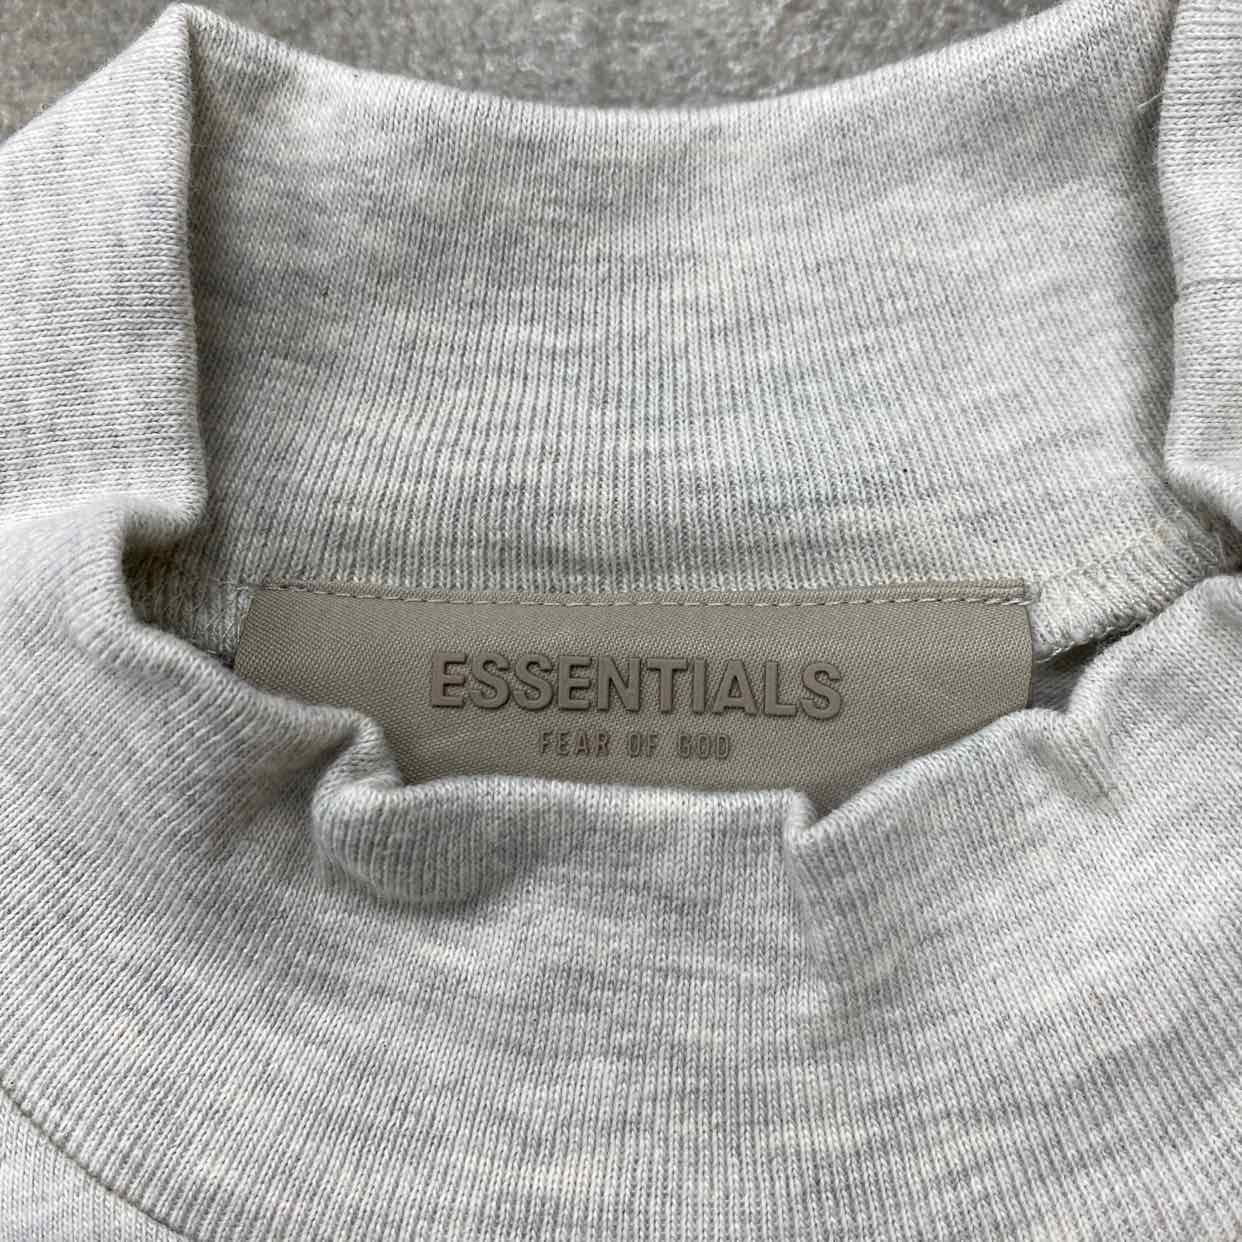 Fear of God Long Sleeve &quot;ESSENTIALS&quot; Light Oatmeal New Size S